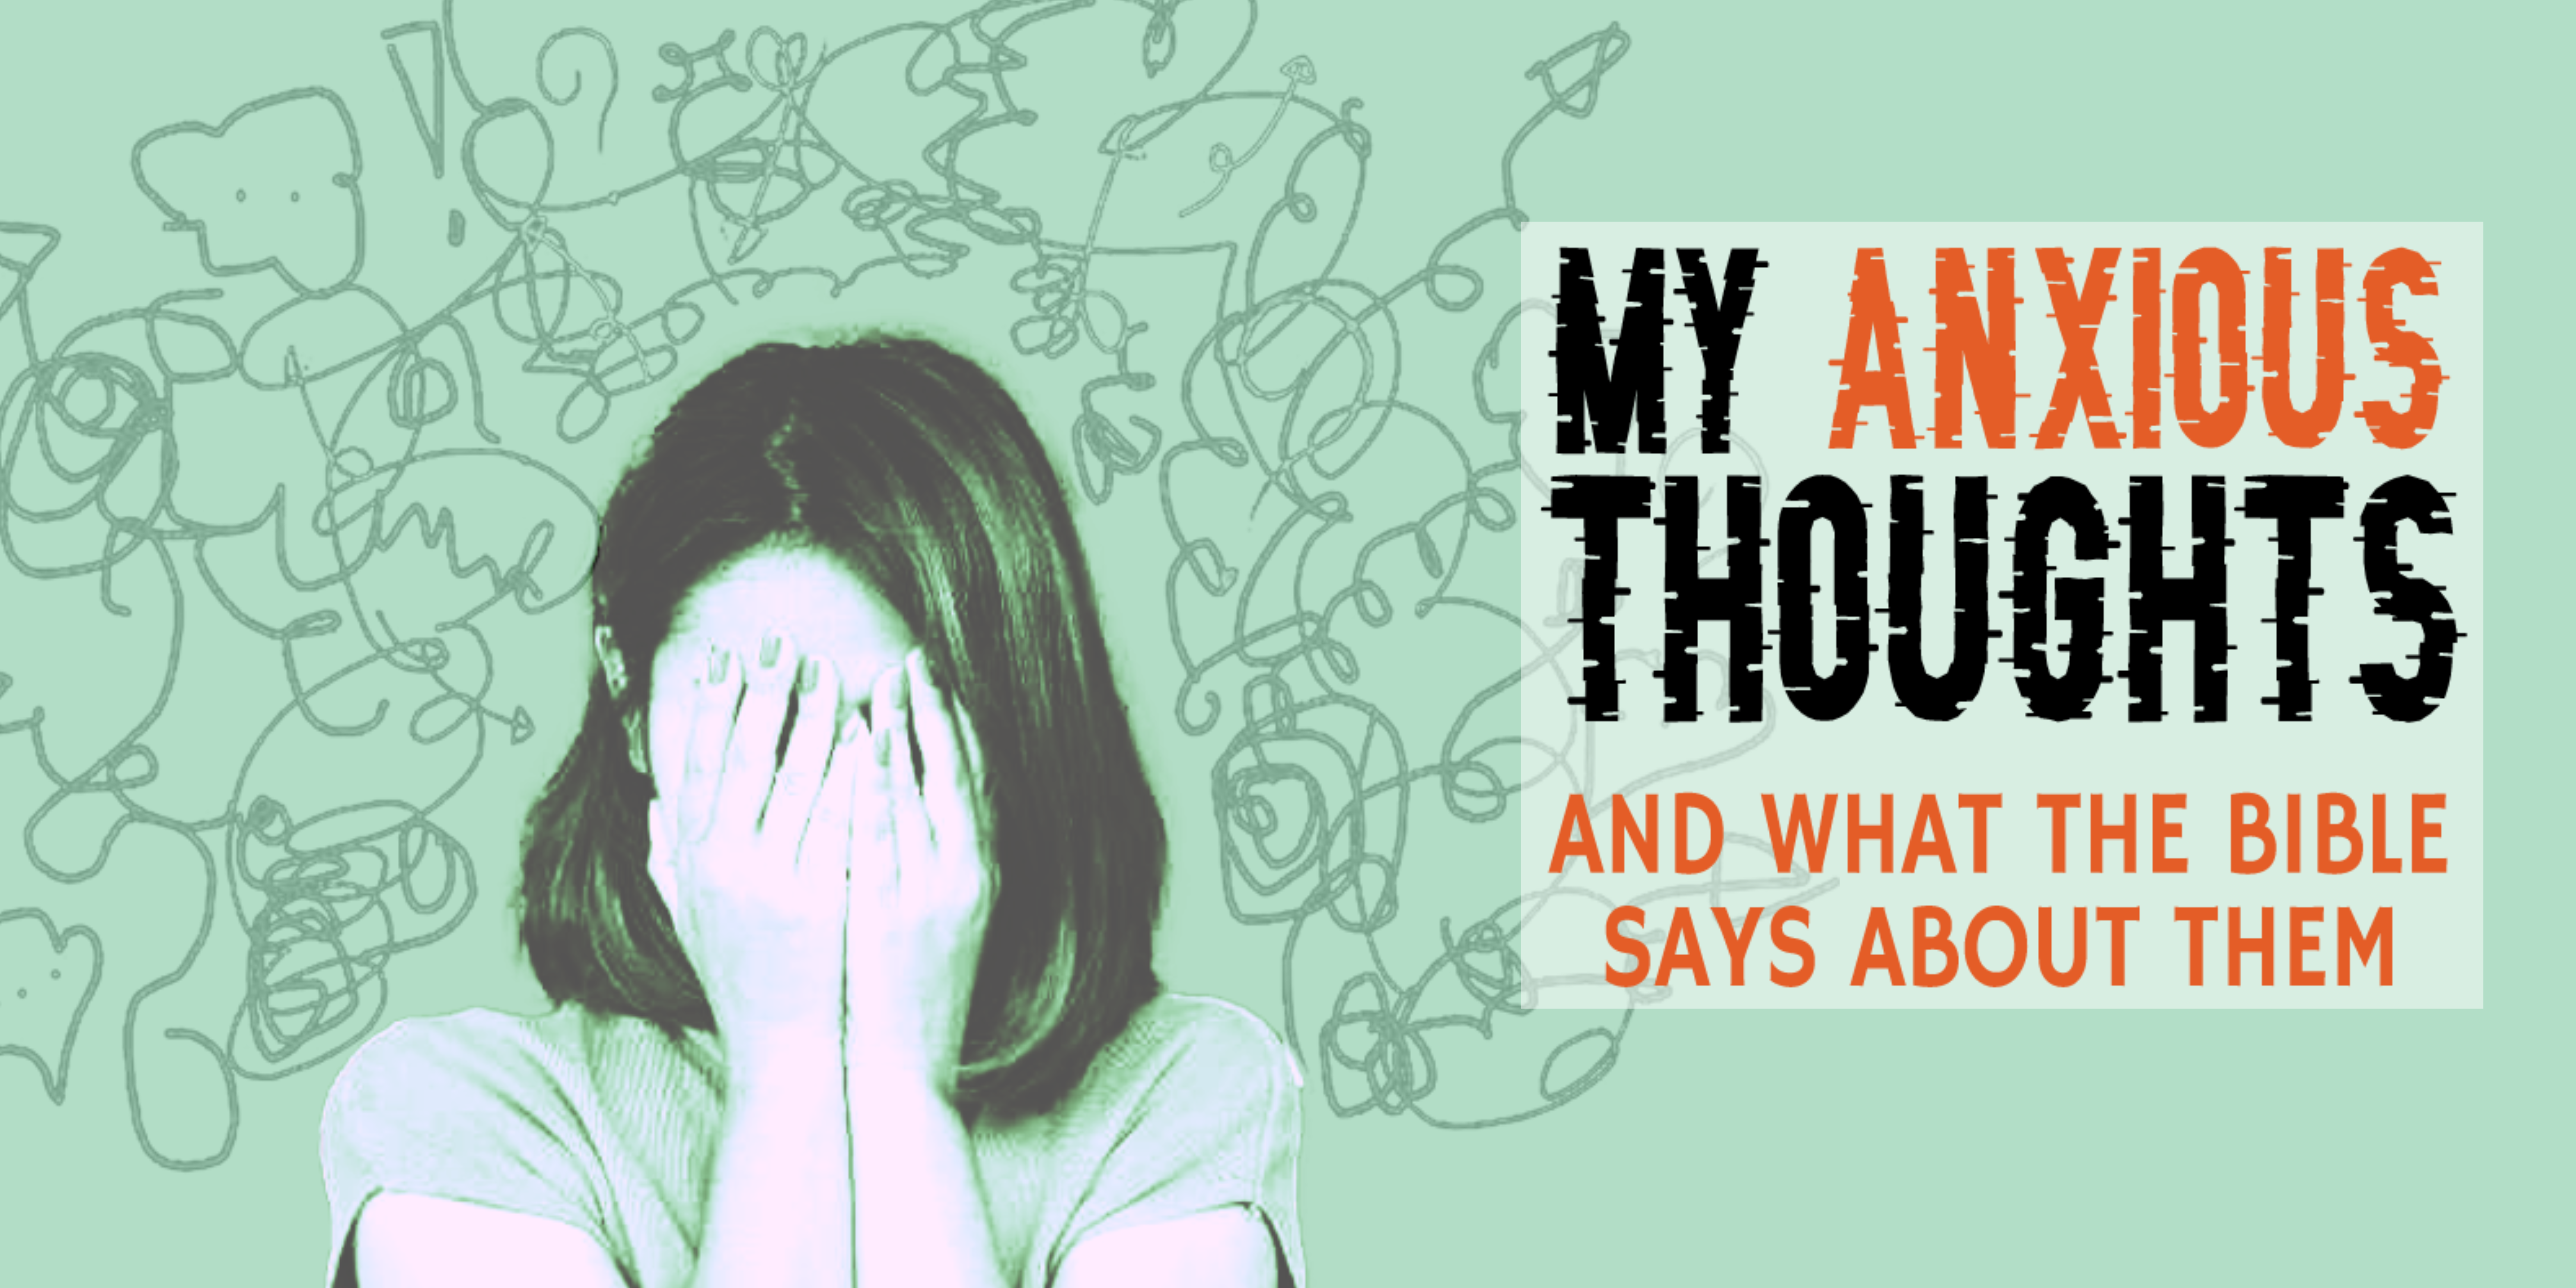 My Anxious Thoughts: And What the Bible Says About Them